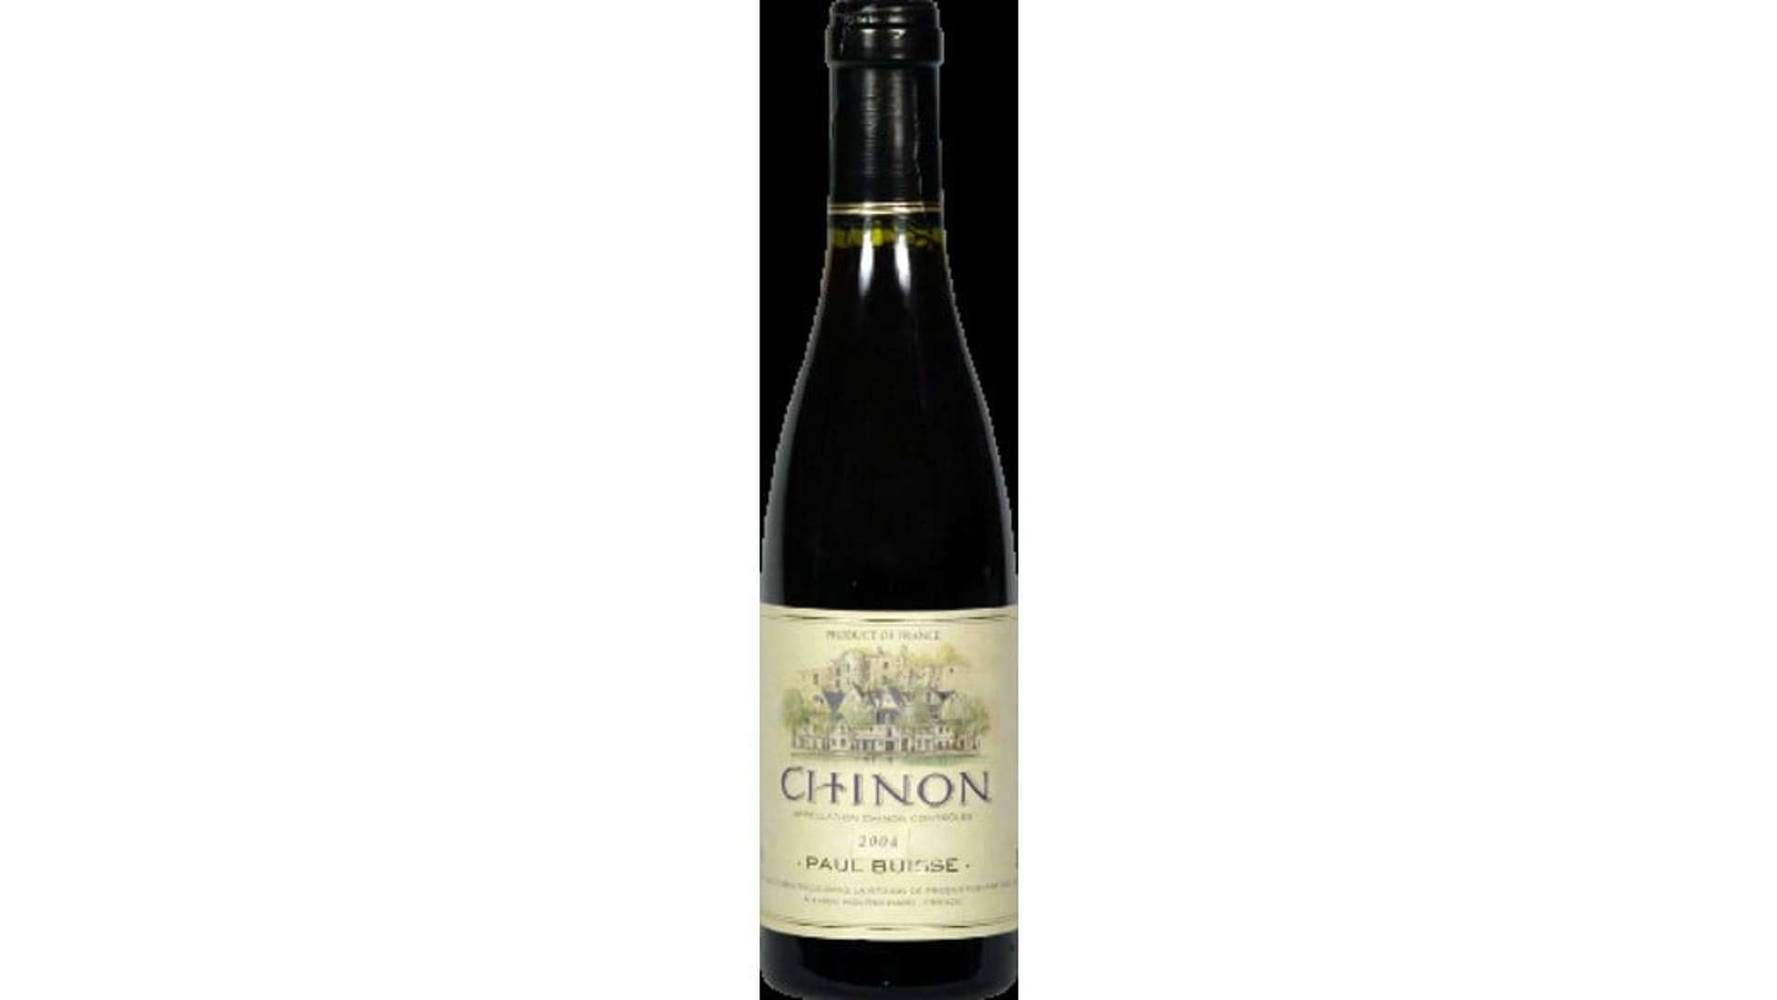 Paul Buisse - Marque nationale vin rouge chinon 2004 (375 ml)